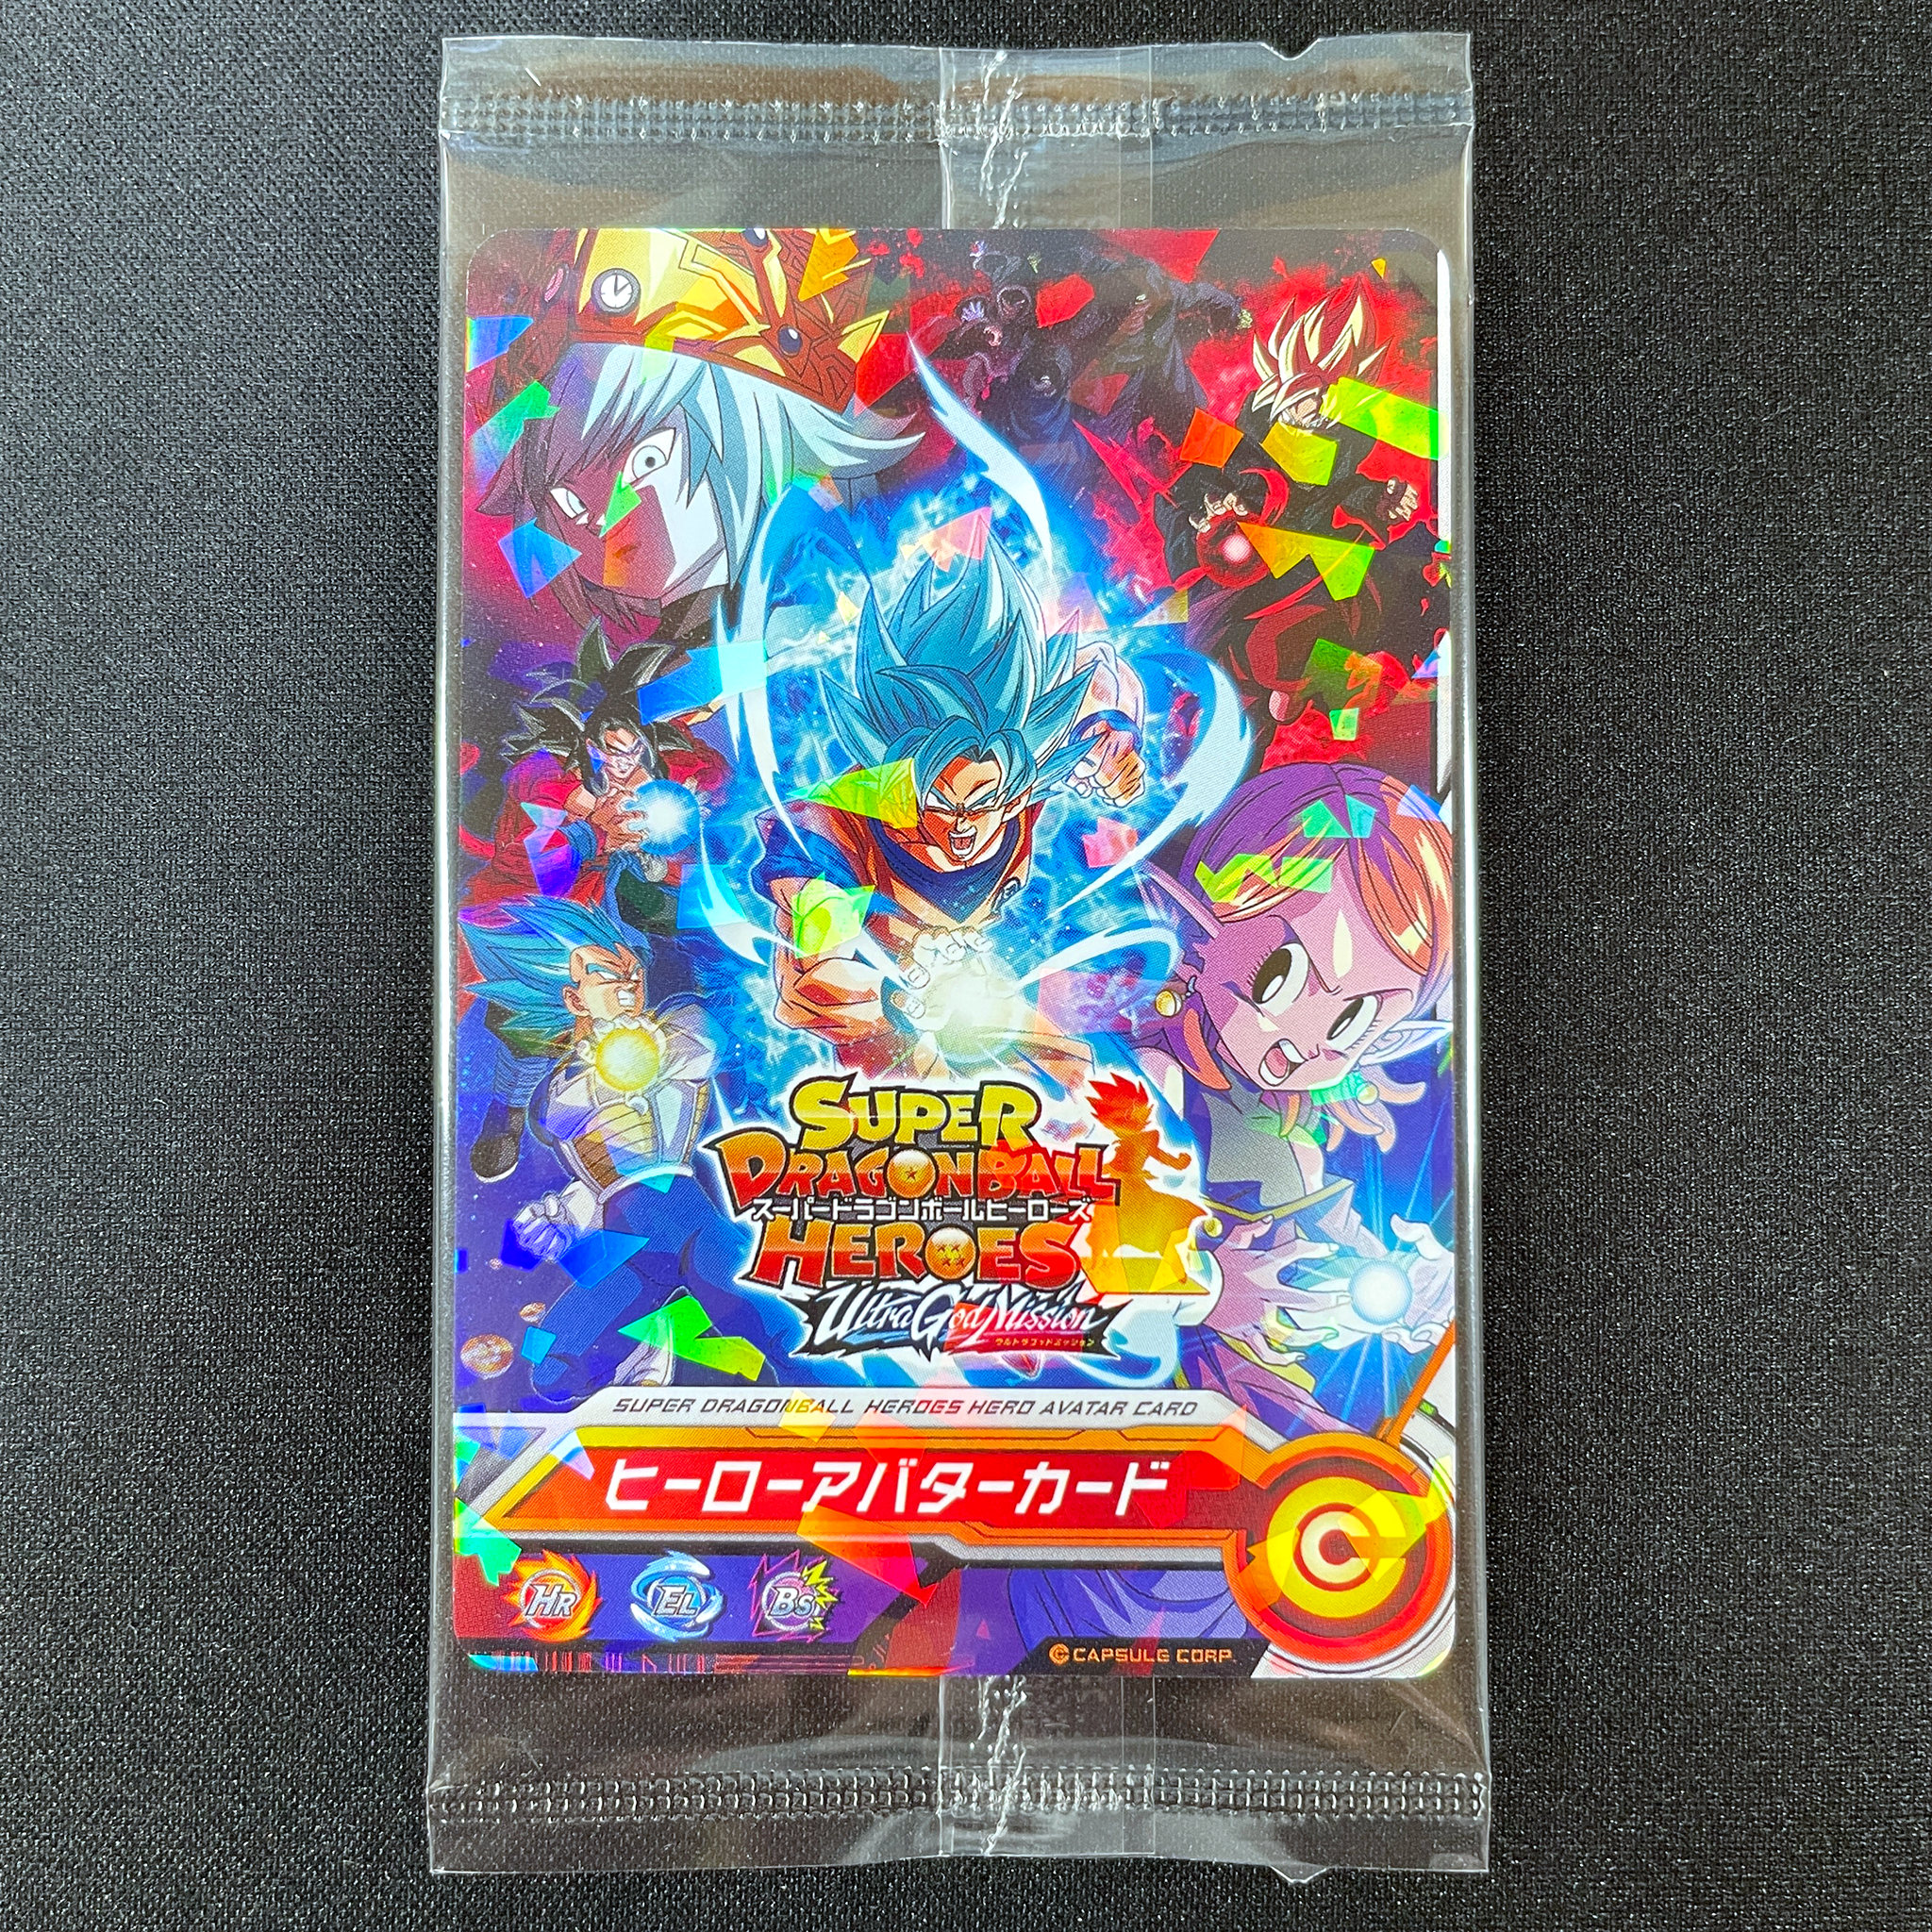 SUPER DRAGON BALL HEROES ULTRA GOD MISSION HERO AVATAR CARD in blister